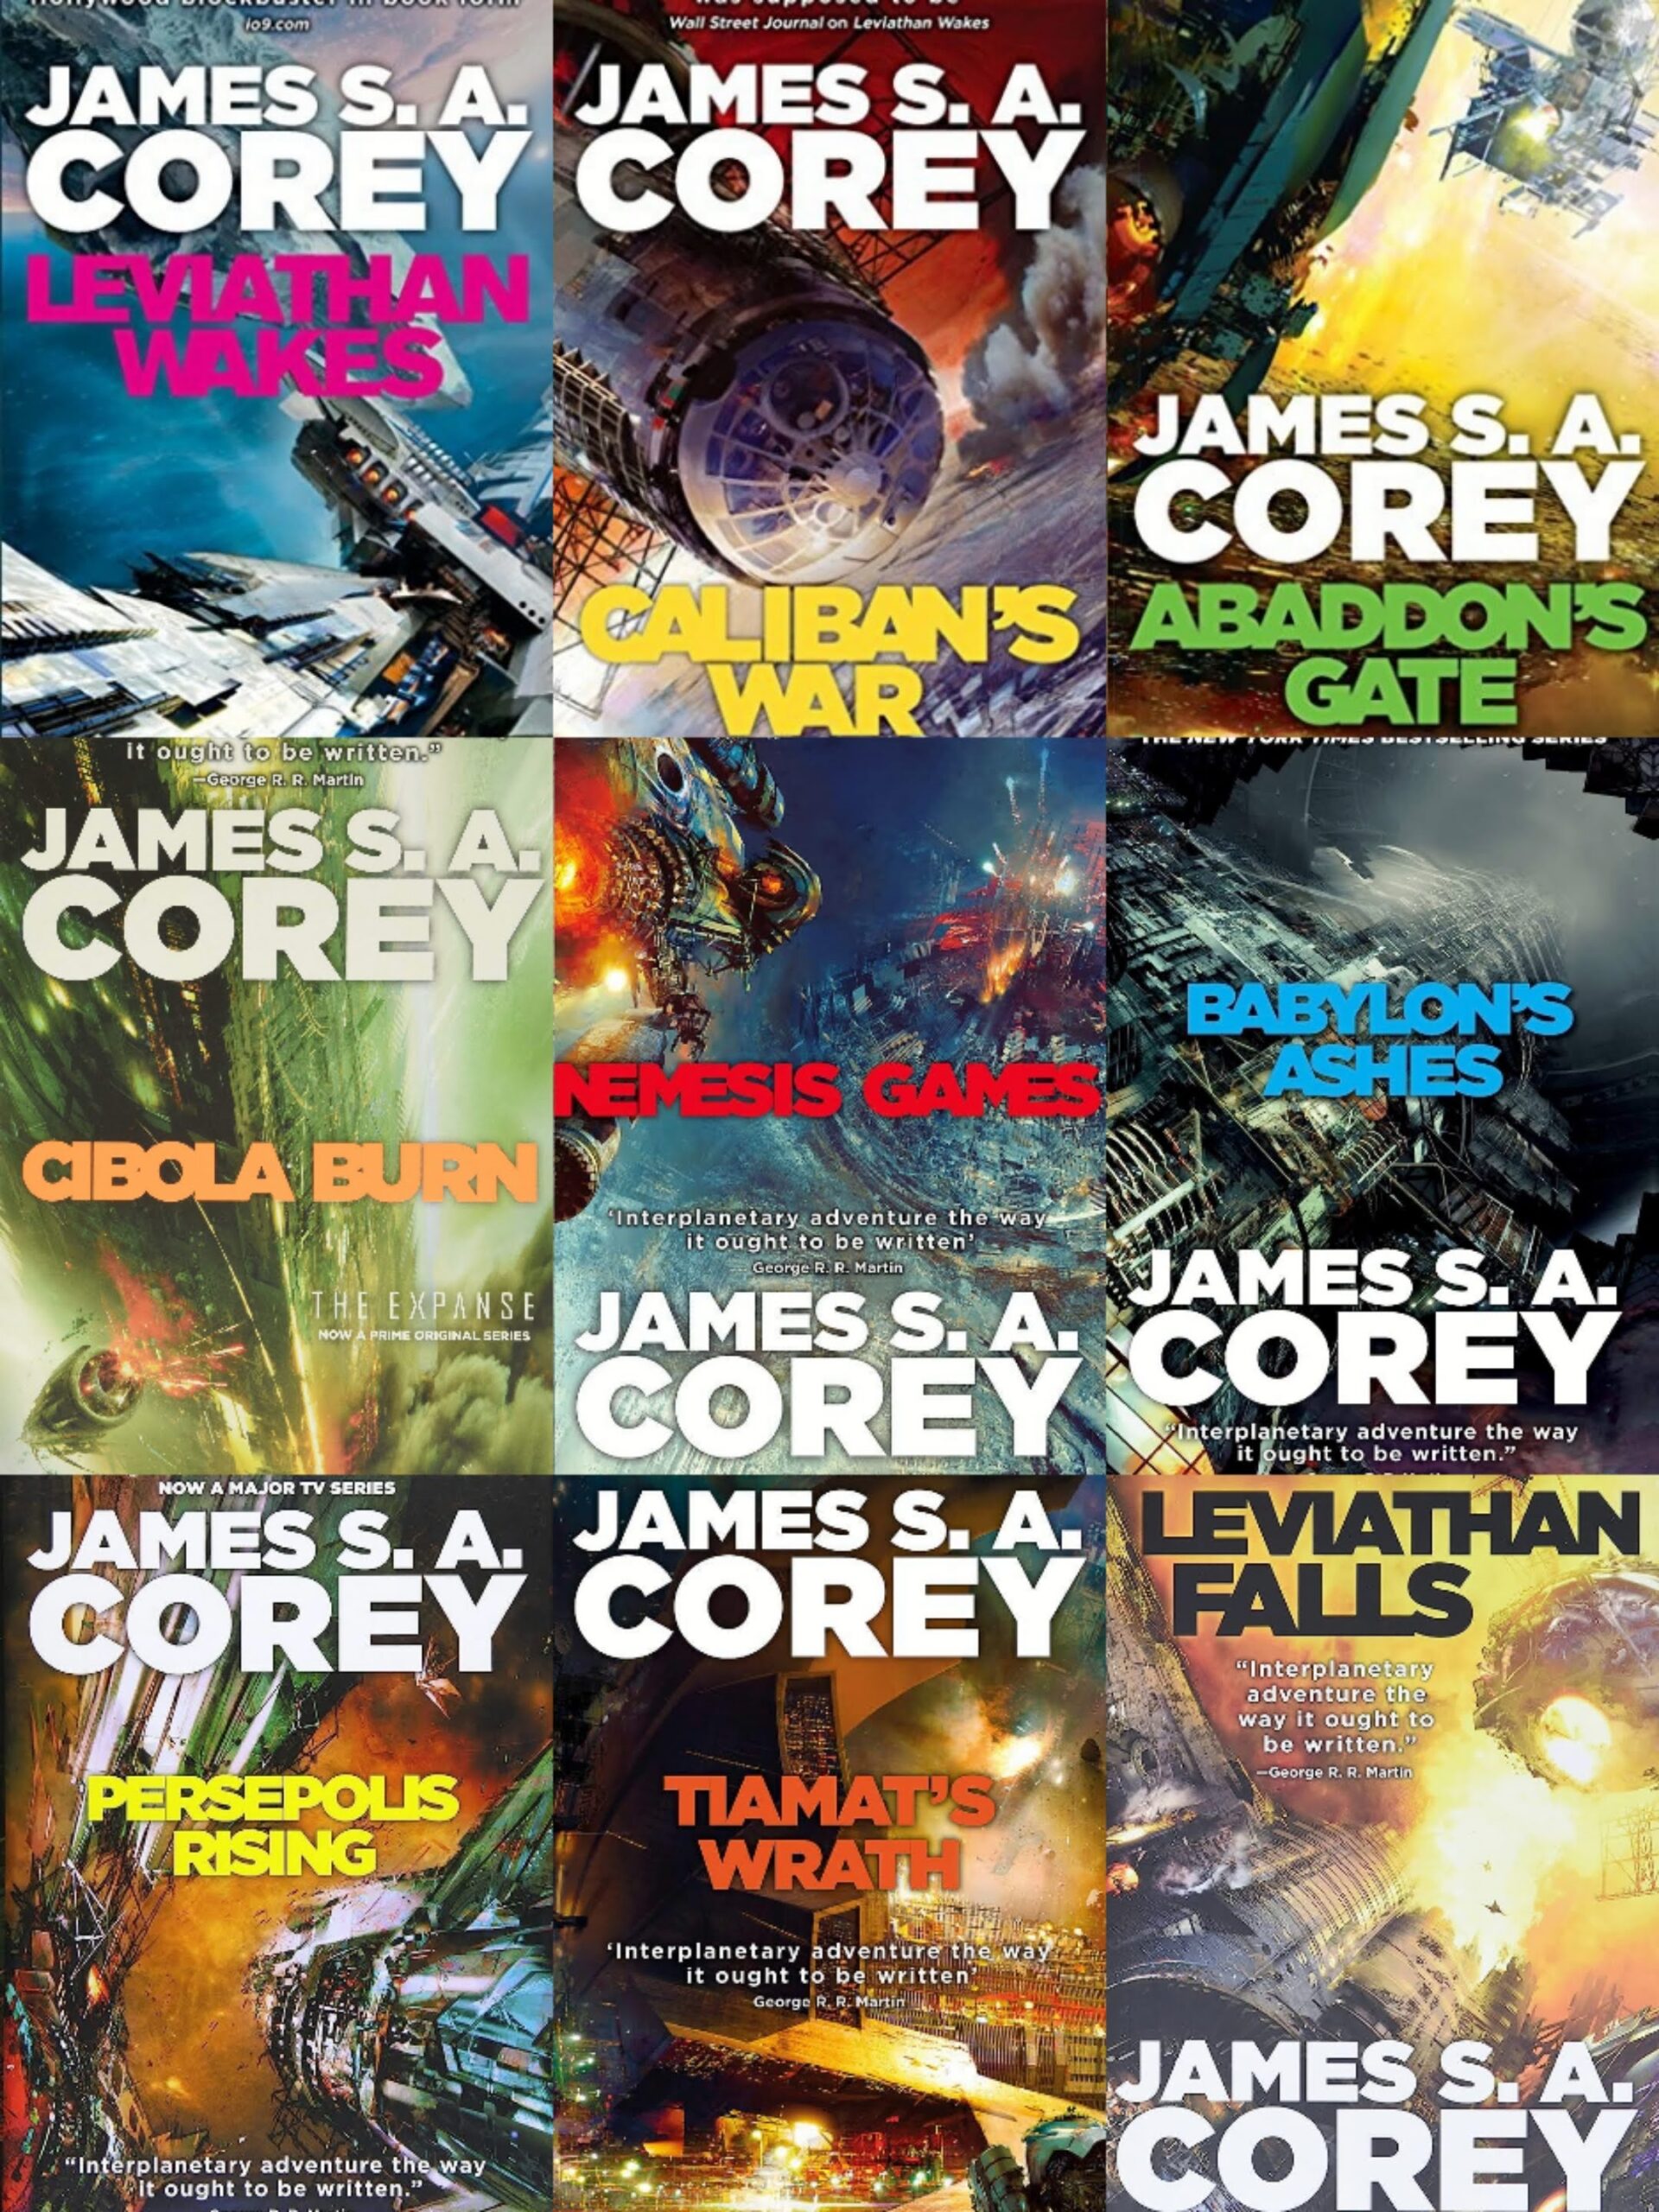 Series Review: The Expanse by James S.A. Corey